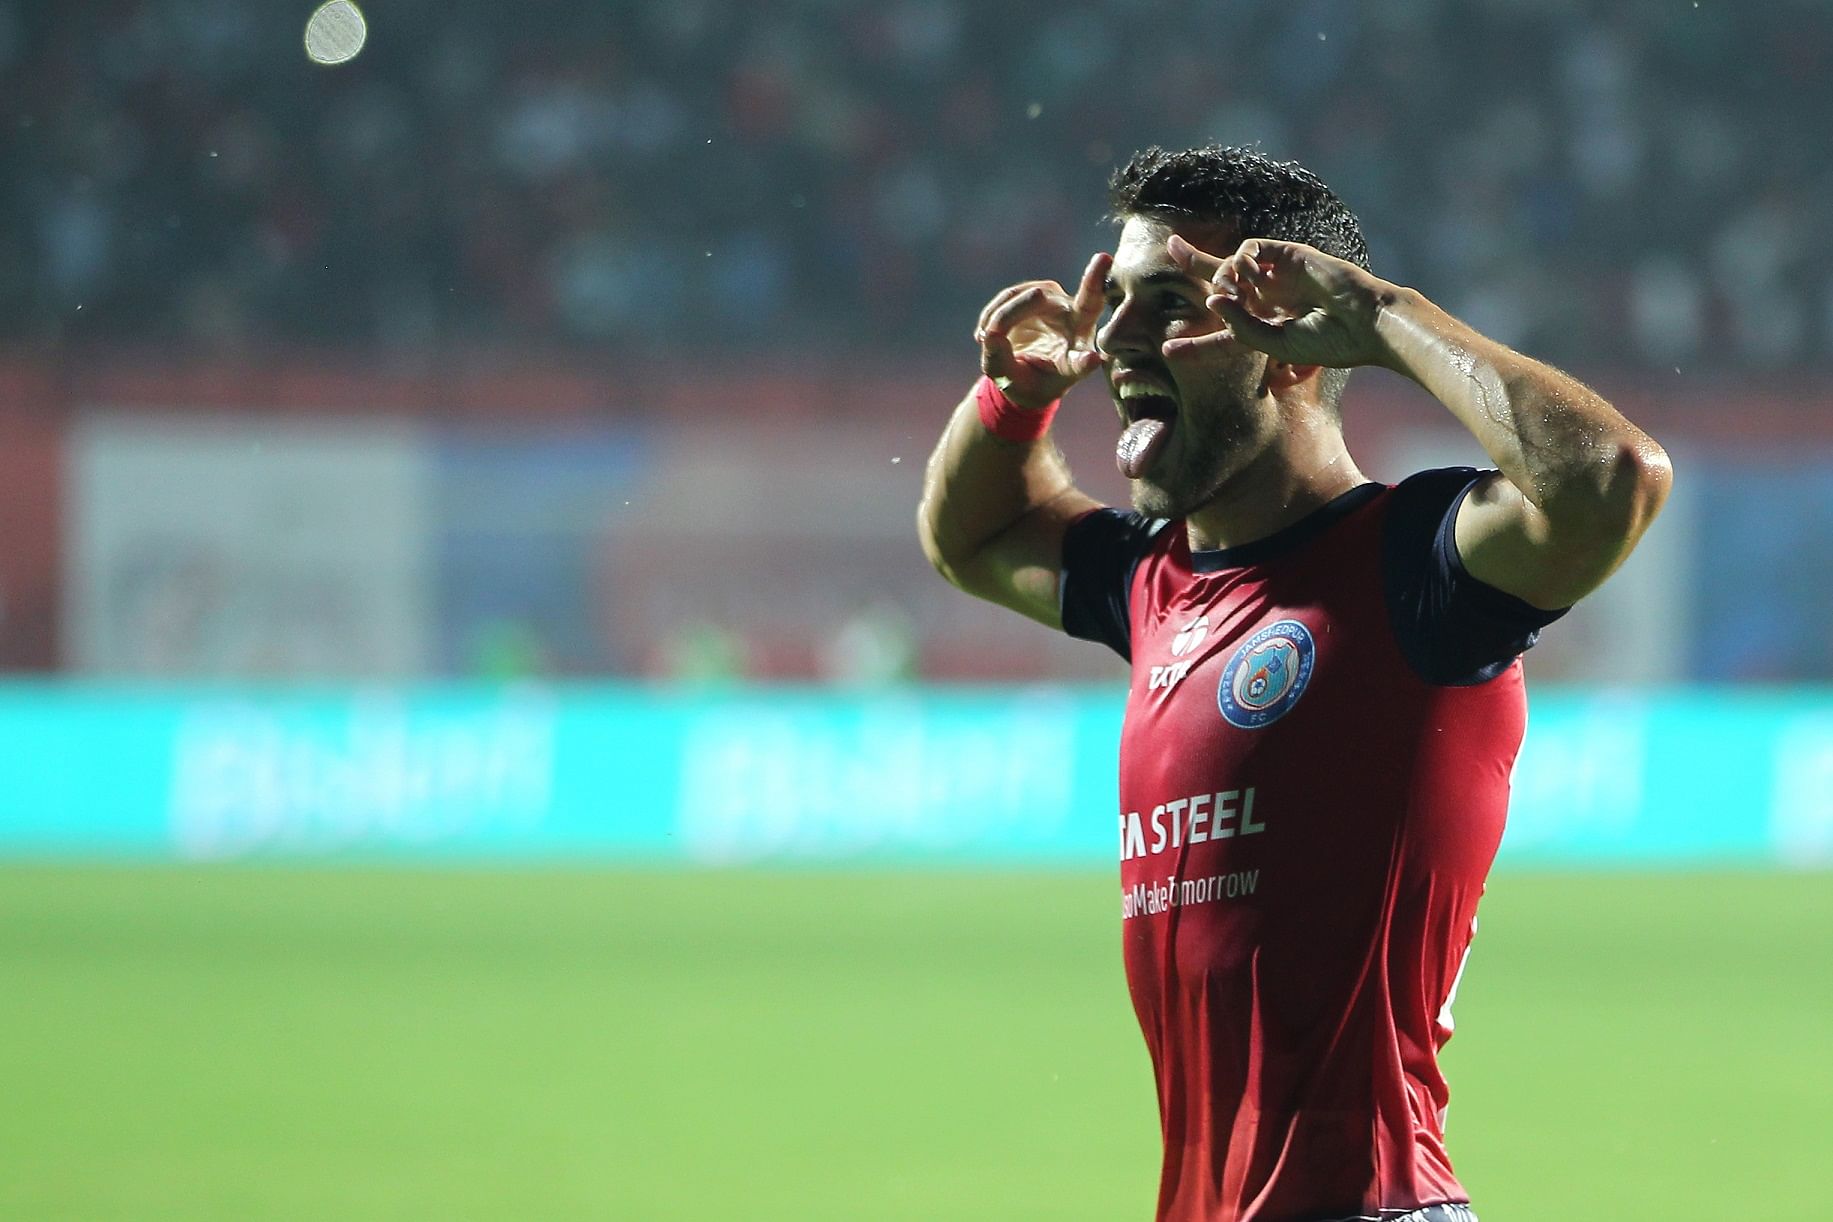 Home team player Sergio Cidoncha celebrates the goal against ATK the match in Hero ISL.